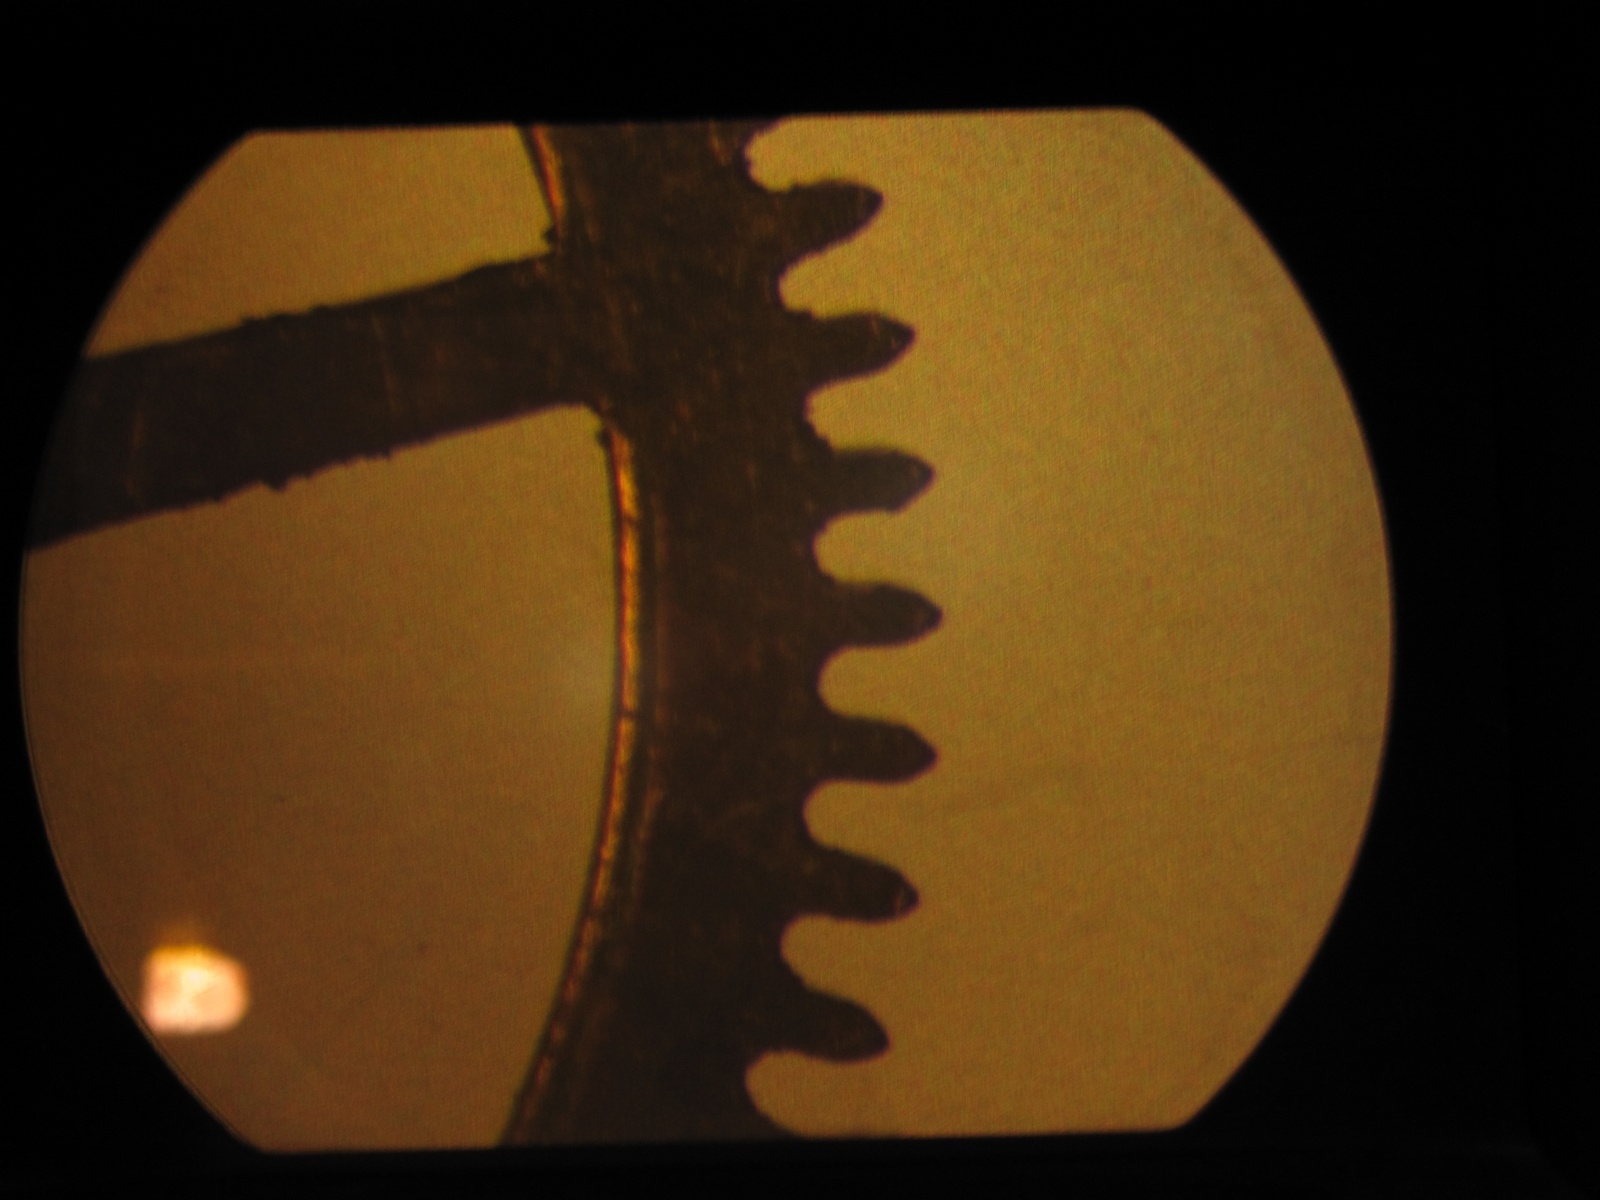 Enlarged image of the wheel 